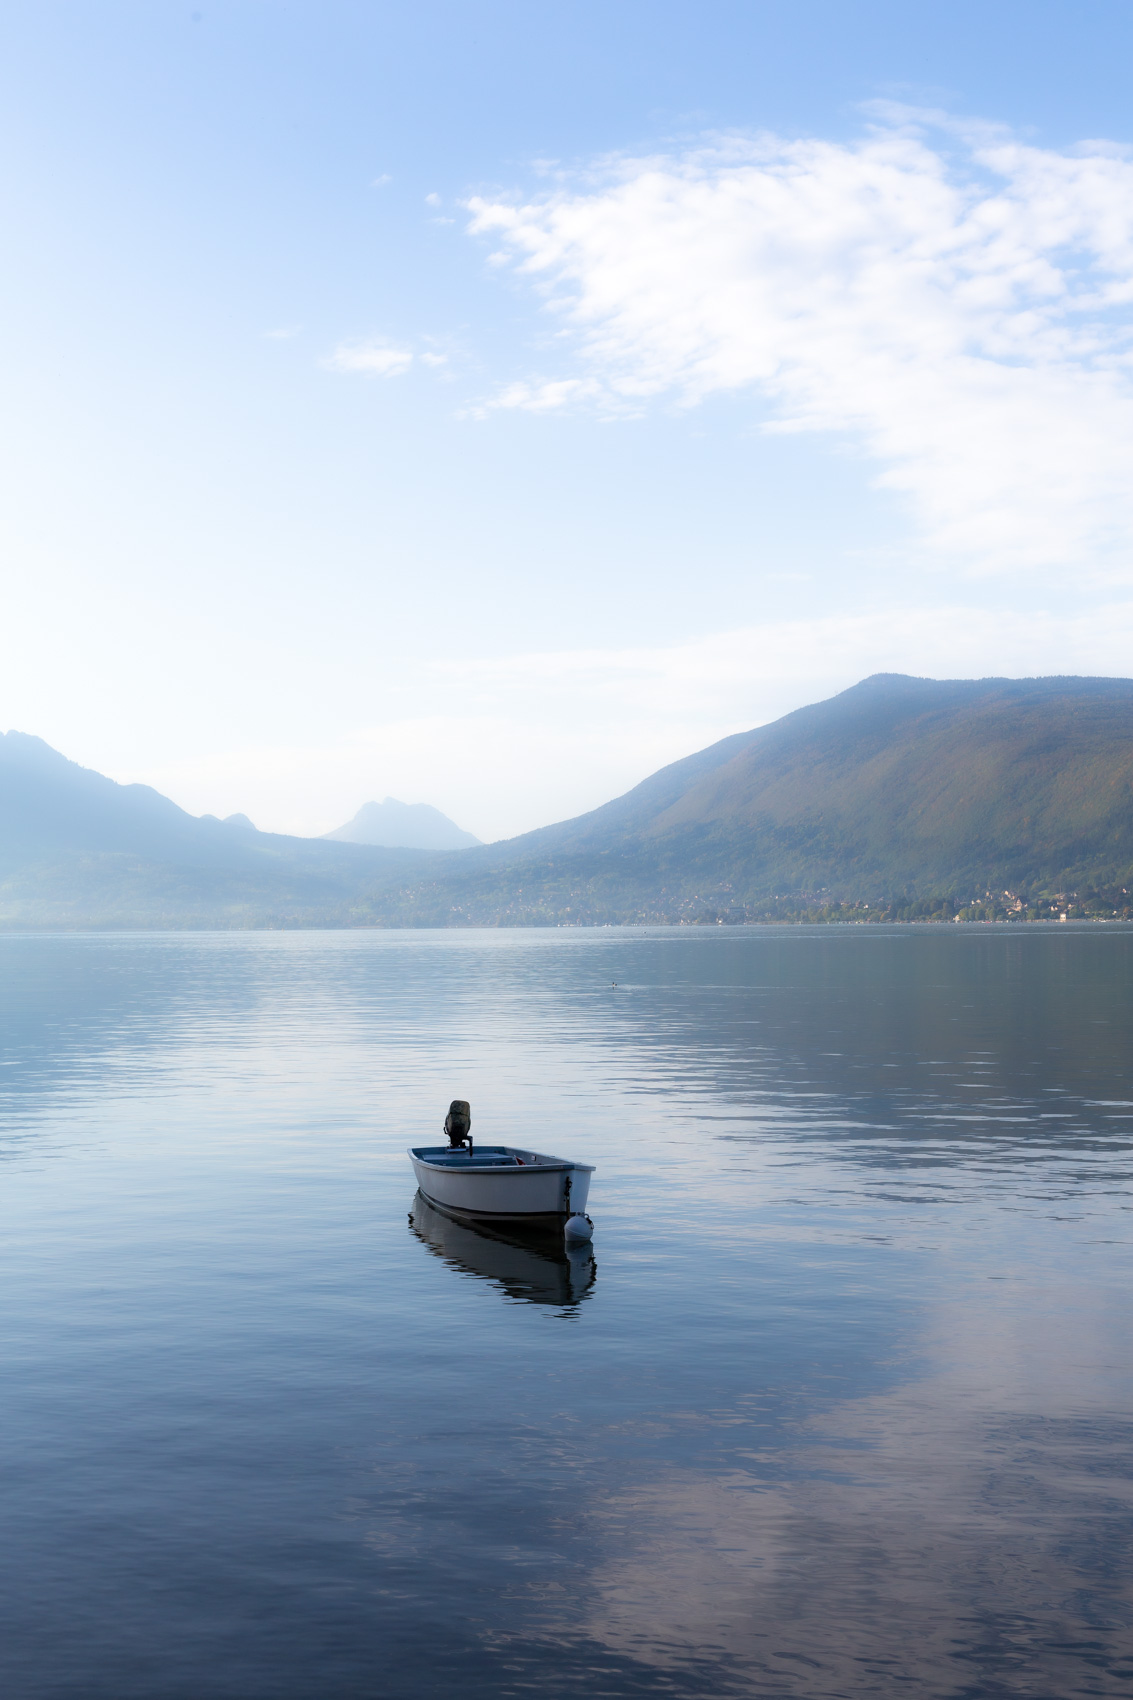 Bateau sur le lac d'Annecy - Canon EOS 5D Mark III - EF 50 mm f/1,4 USM - ISO 200 - f/11 - 1/400 s